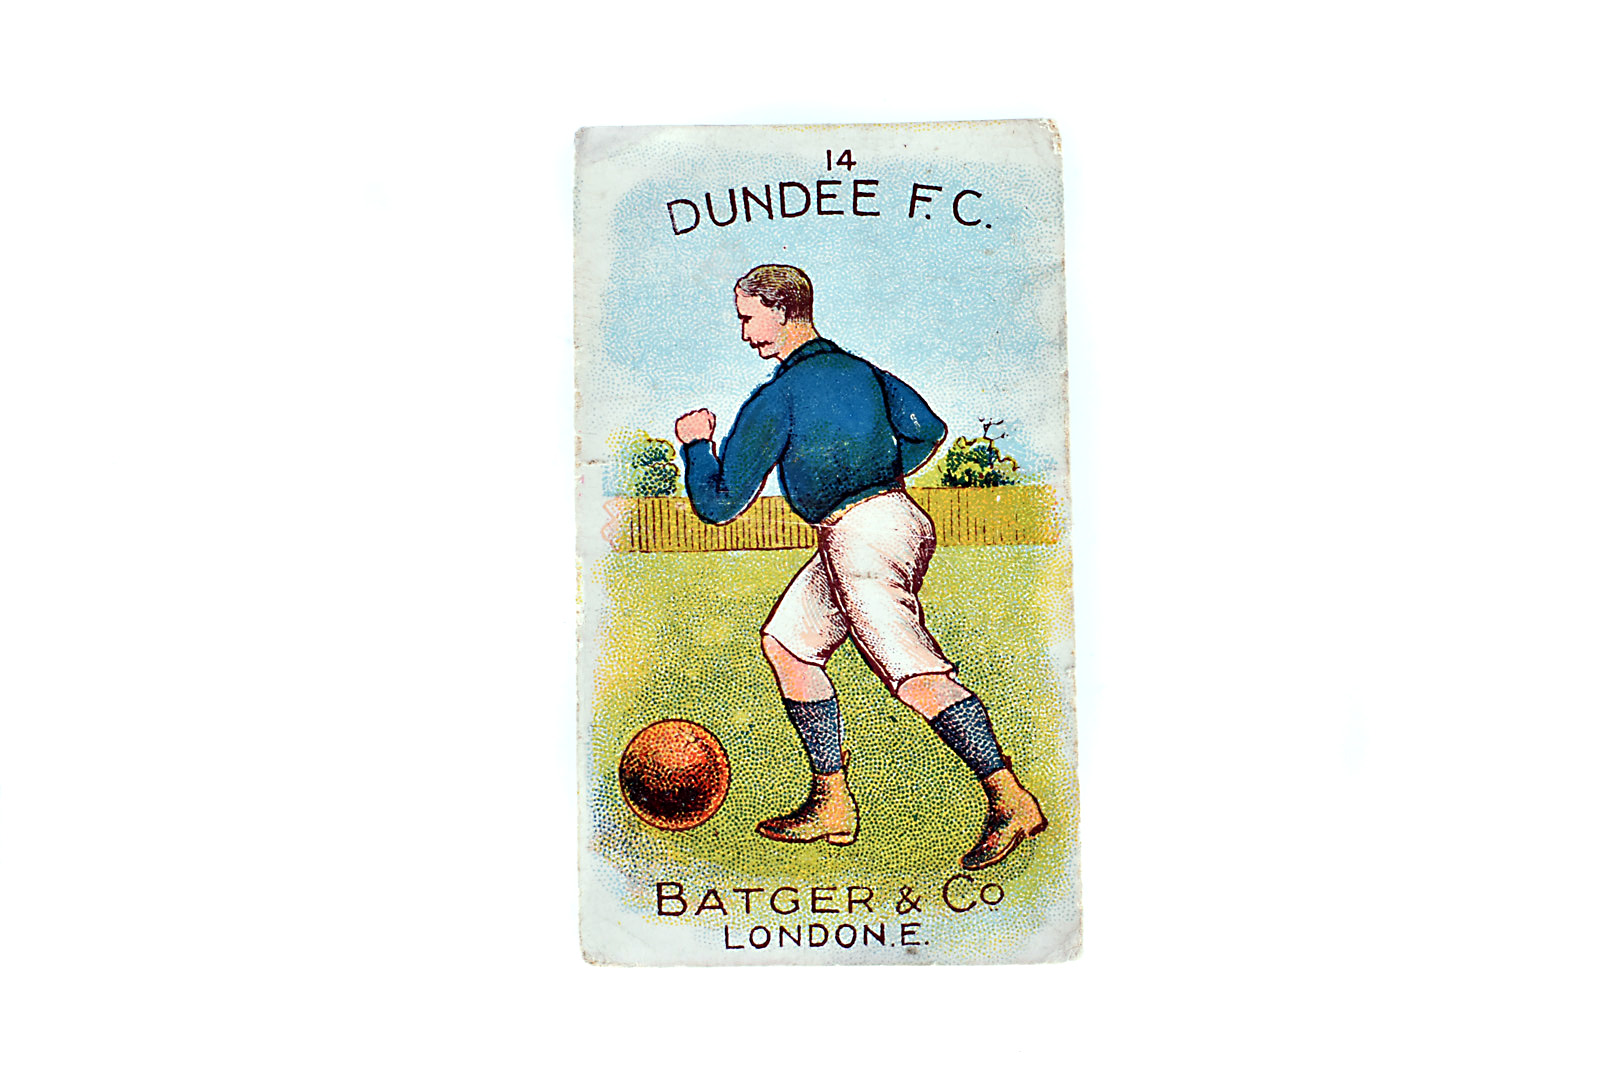 Batger & Co, Football Clubs, No.14, Dundee FC, stamped Cancelled to reverse in red - Image 2 of 6